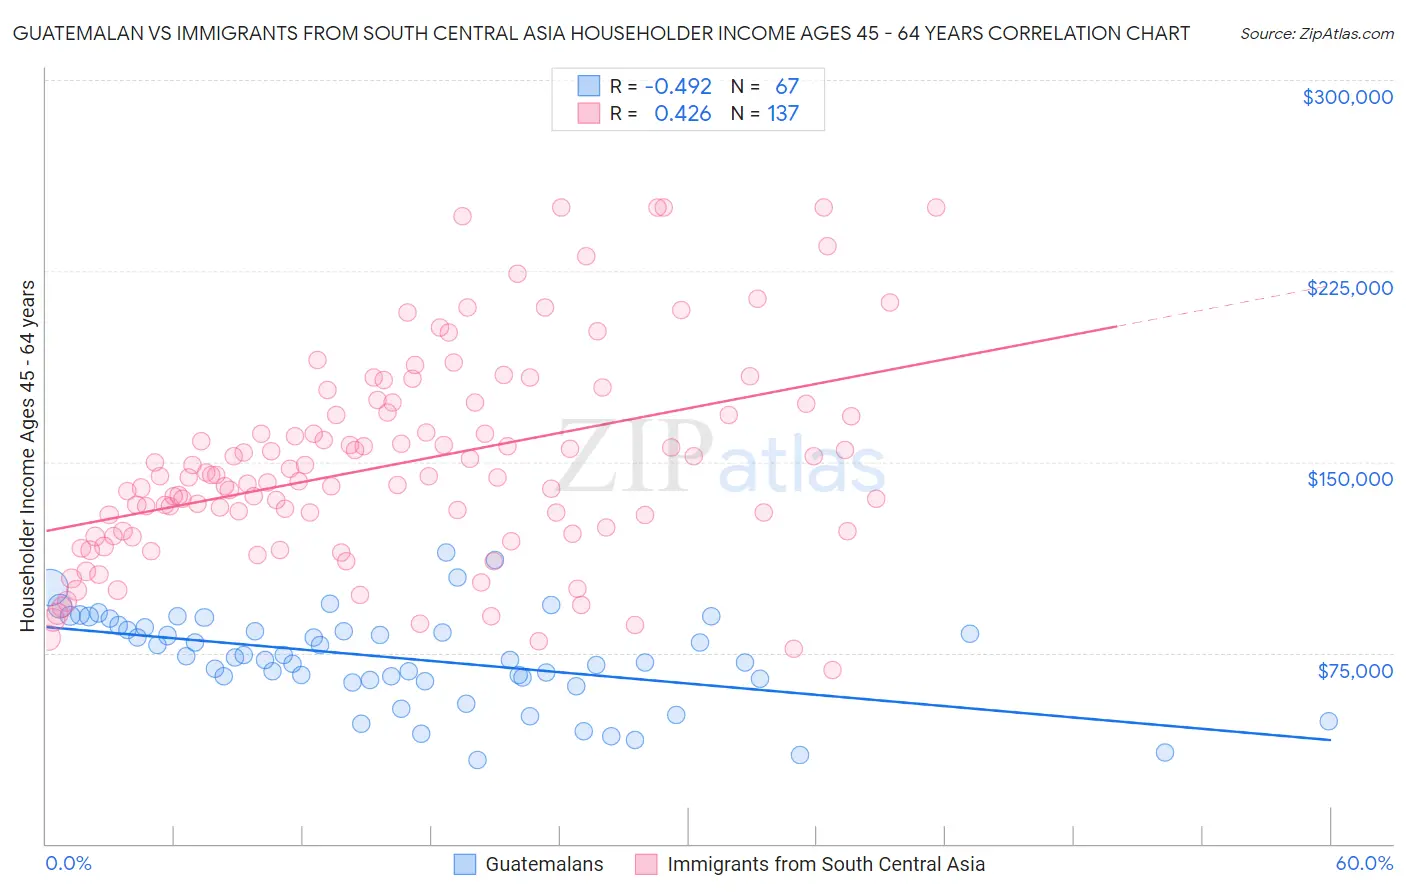 Guatemalan vs Immigrants from South Central Asia Householder Income Ages 45 - 64 years